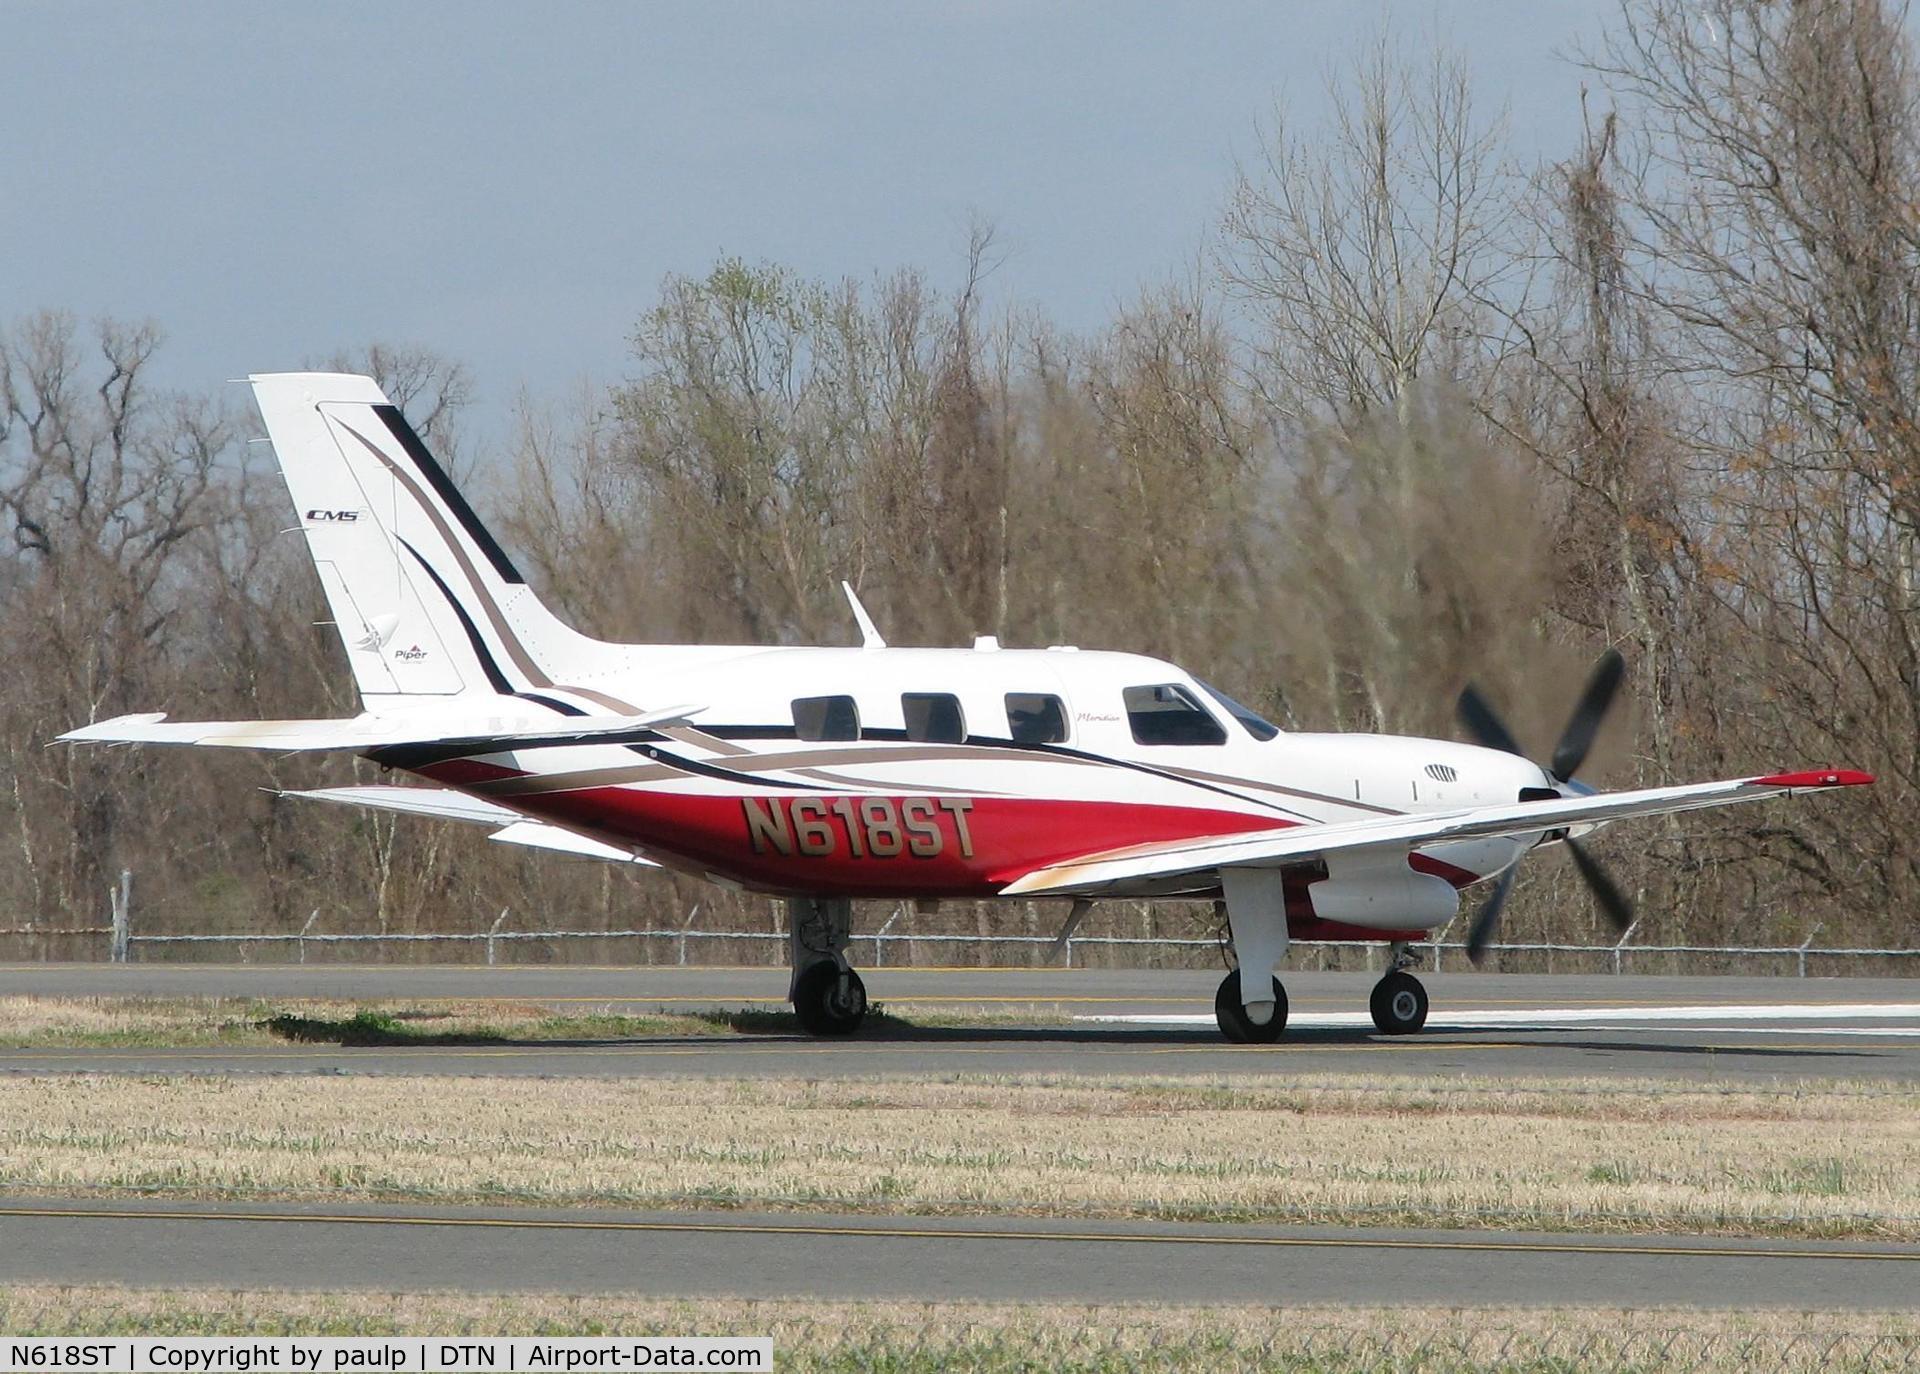 N618ST, 2007 Piper PA-46-500TP Malibu Meridian C/N 4697318, Turning onto runway 14 from taxiway Foxtrot at the Shreveport Downtown airport.